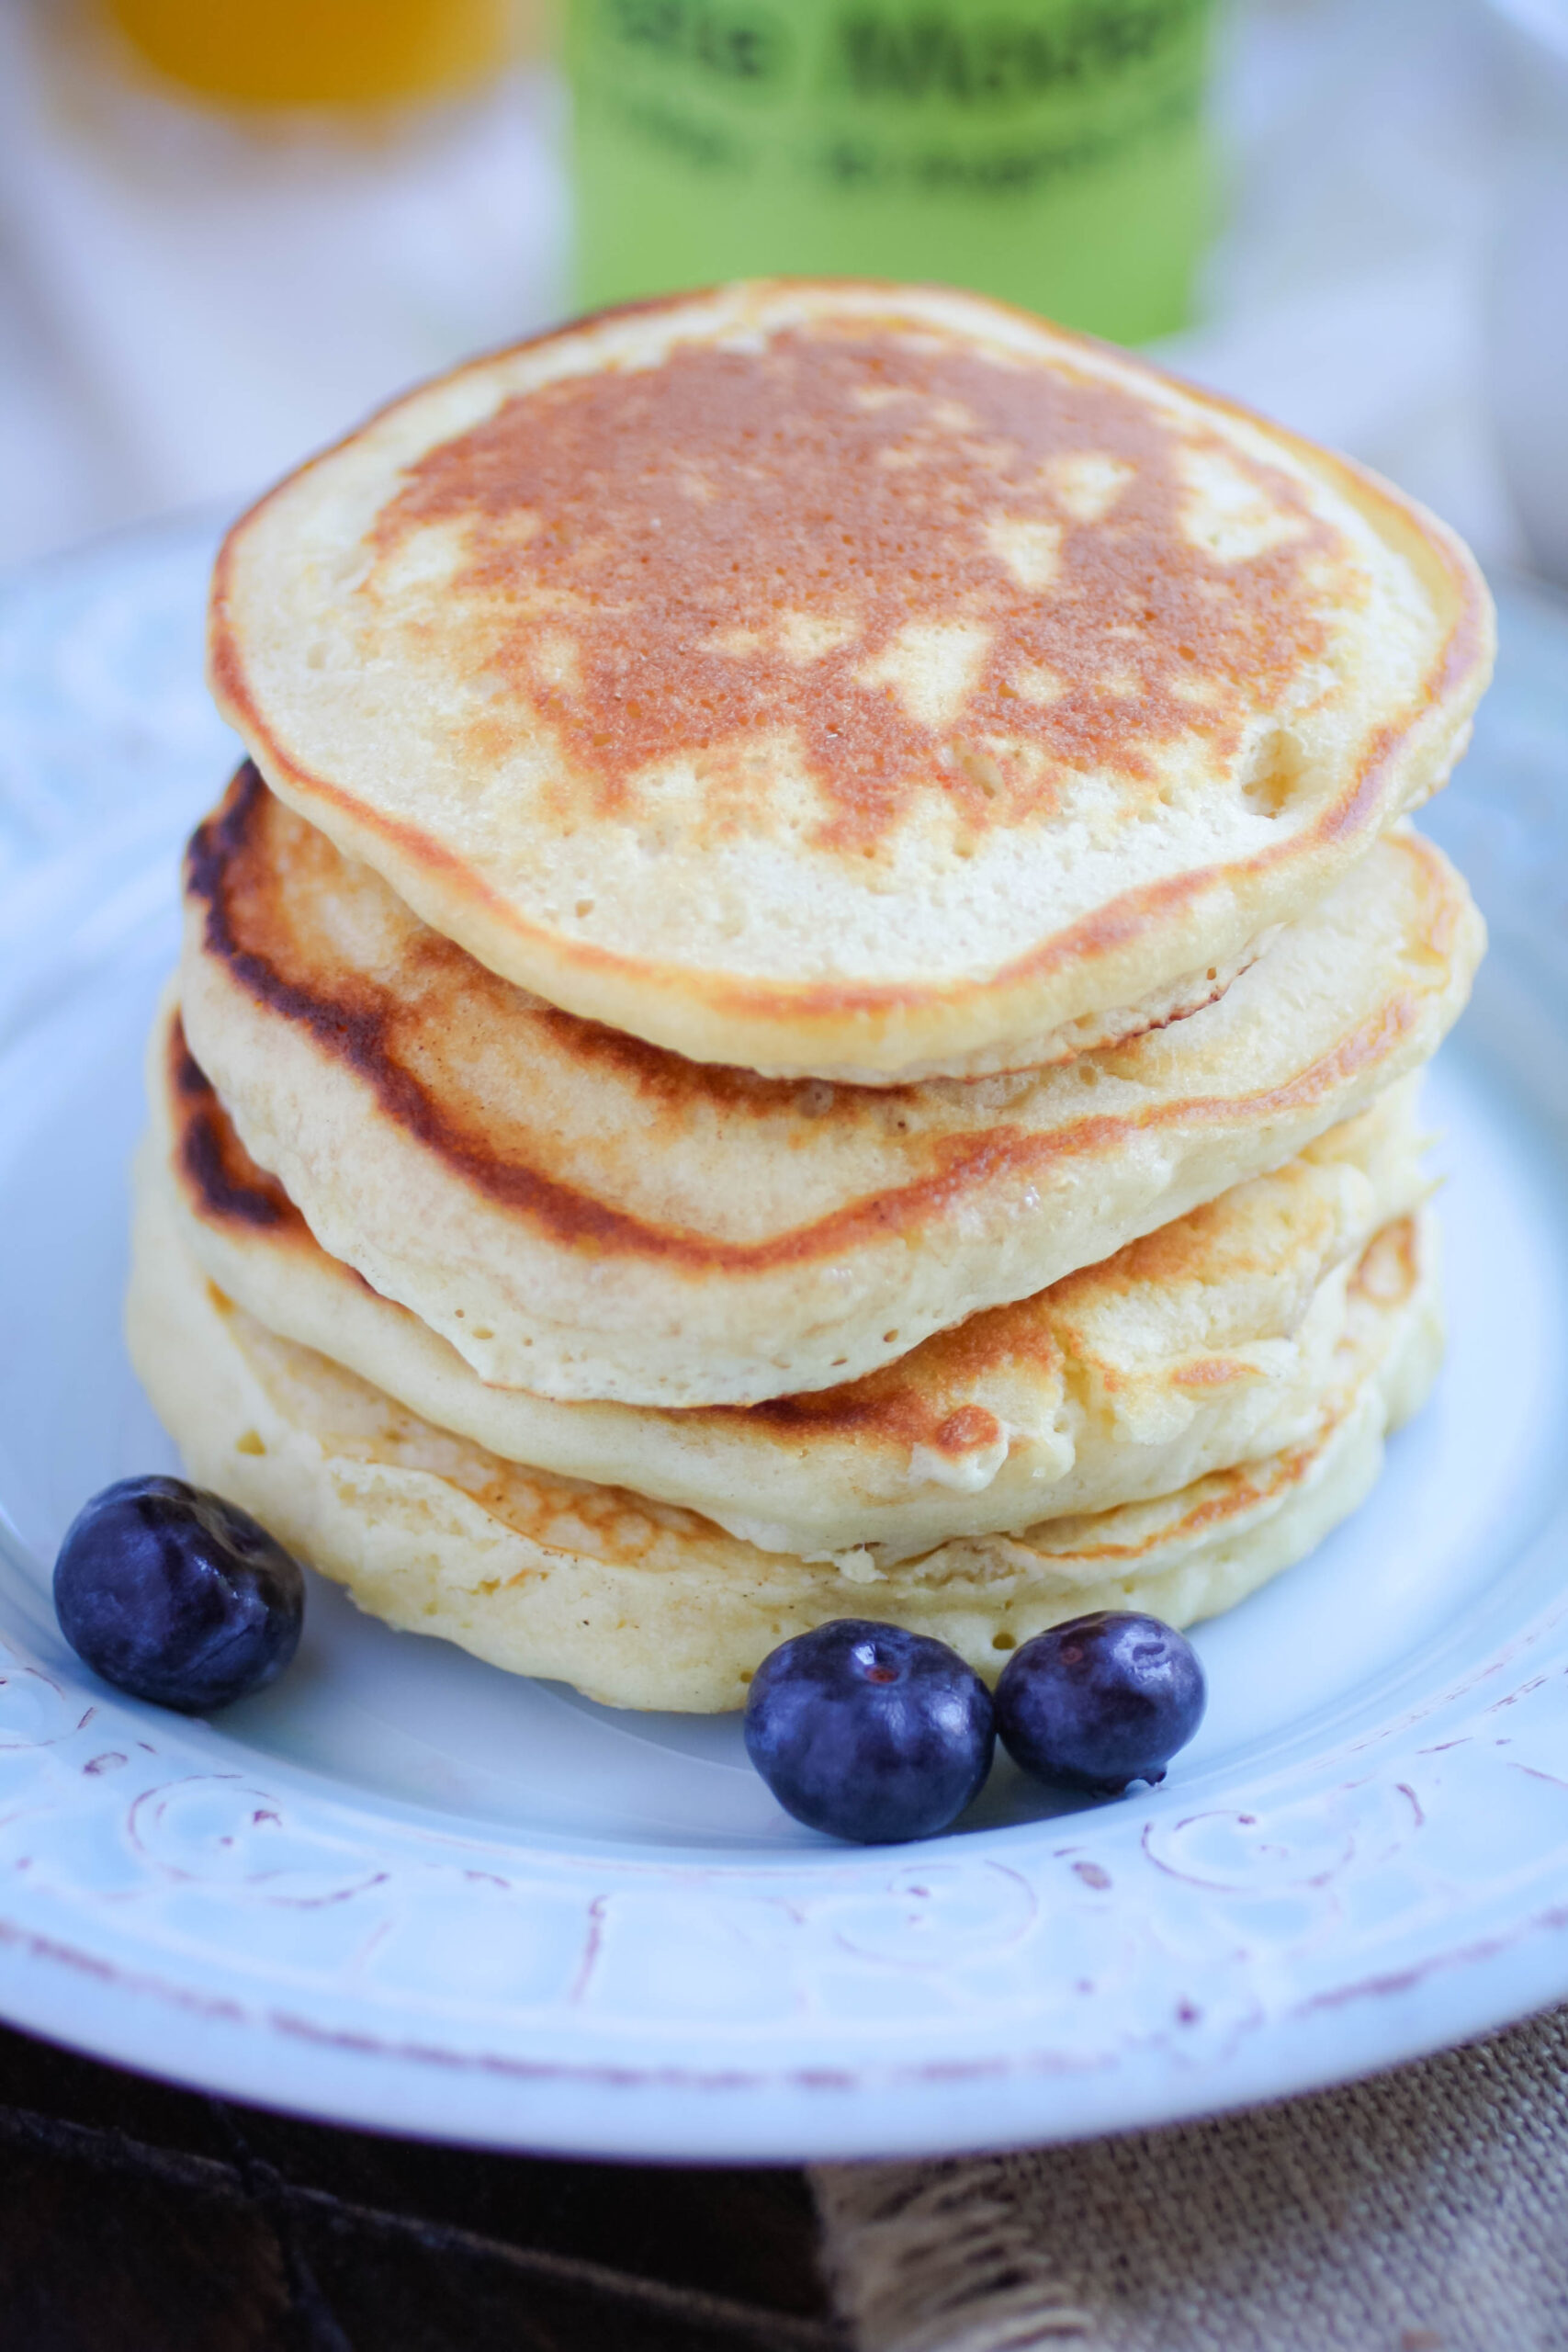 Queen Elizabeth II’s Drop Scones (Scottish Pancakes) are stacked tall on a plate.